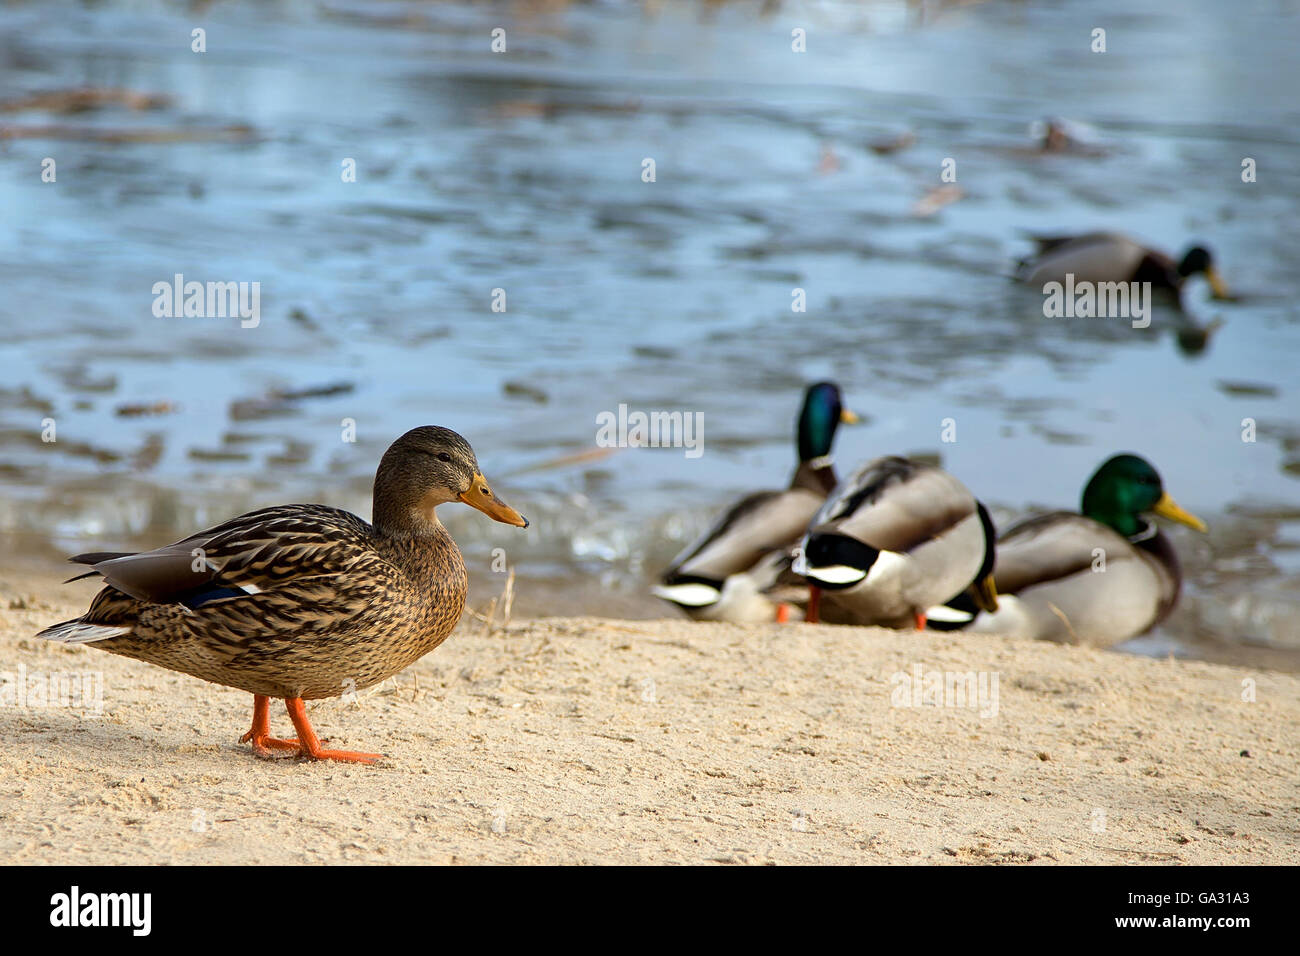 Duck in the wild near the lake Stock Photo